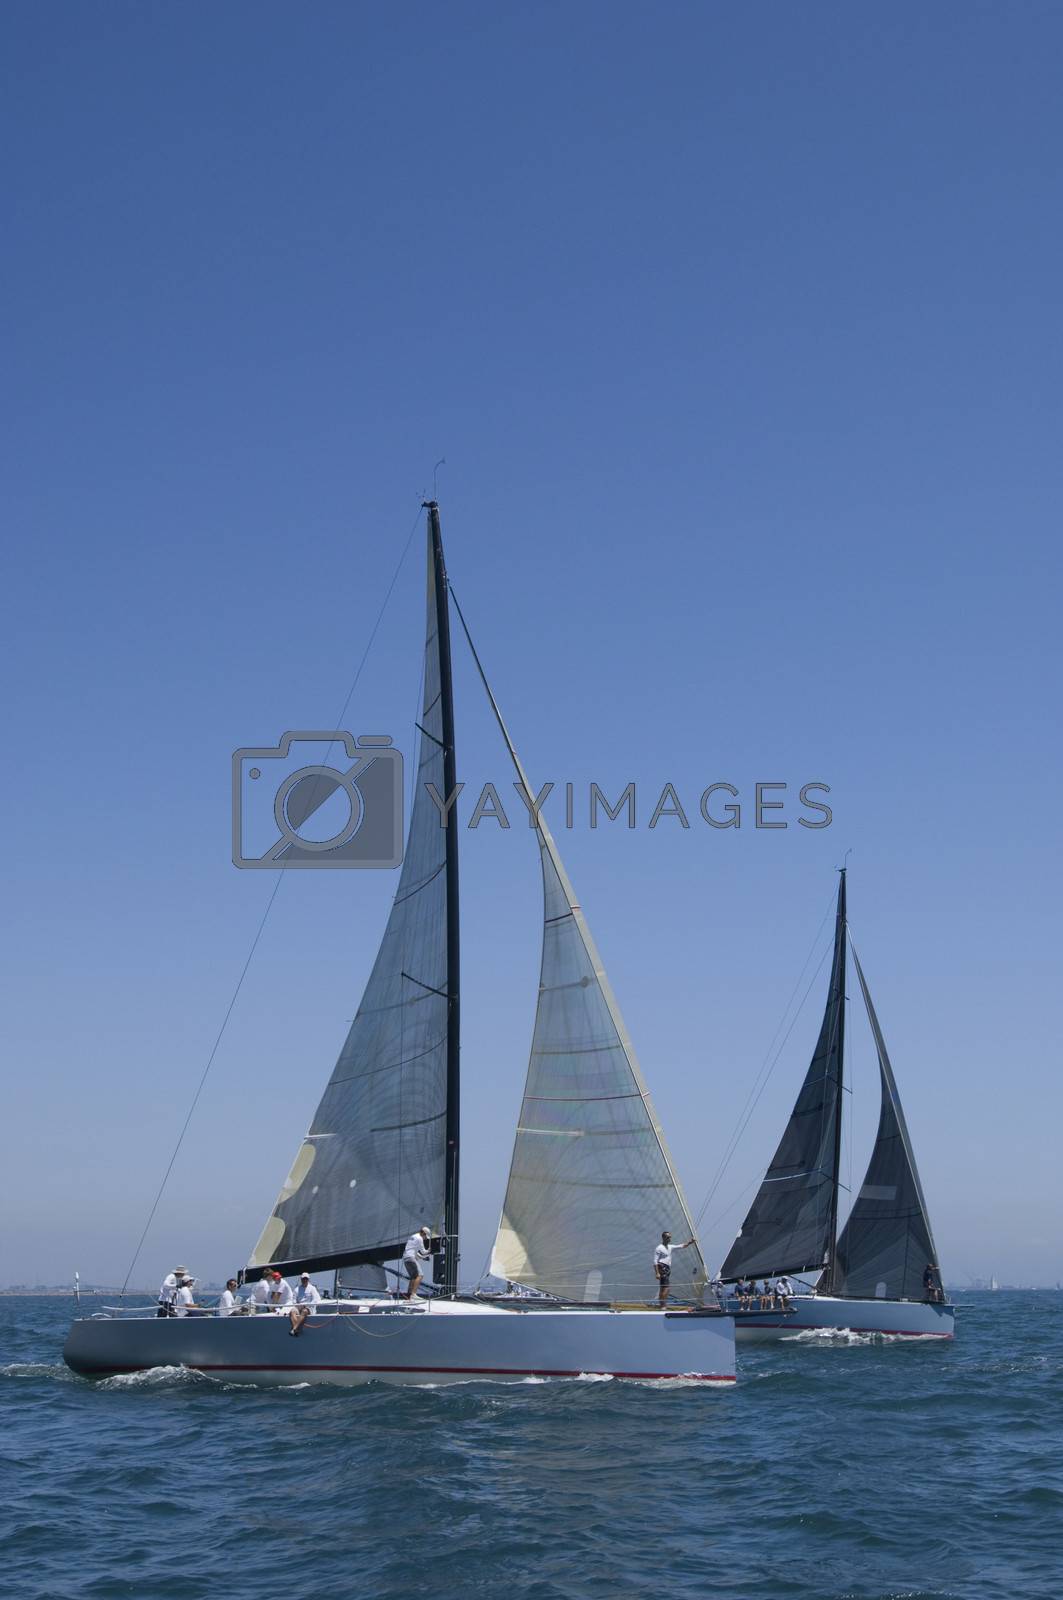 Royalty free image of Yachts compete in team sailing event California by moodboard